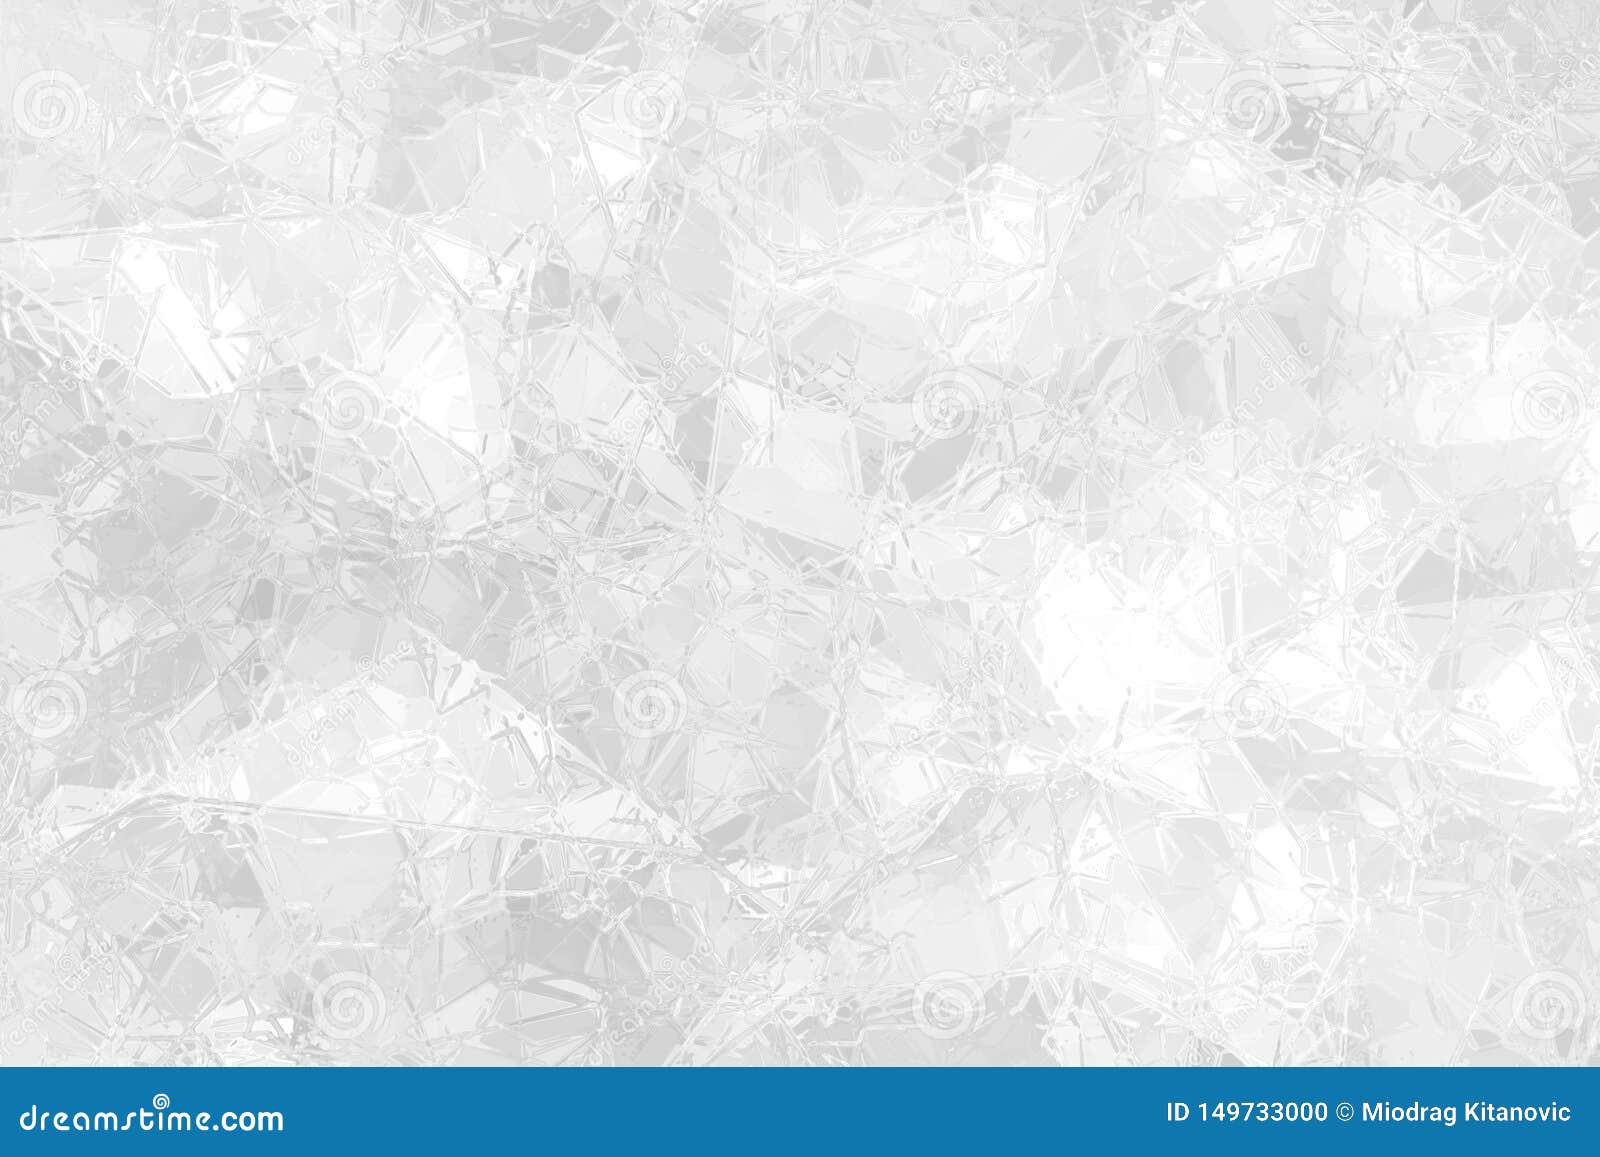 Abstract Ice Crystal Background Stock Illustration - Illustration of ...